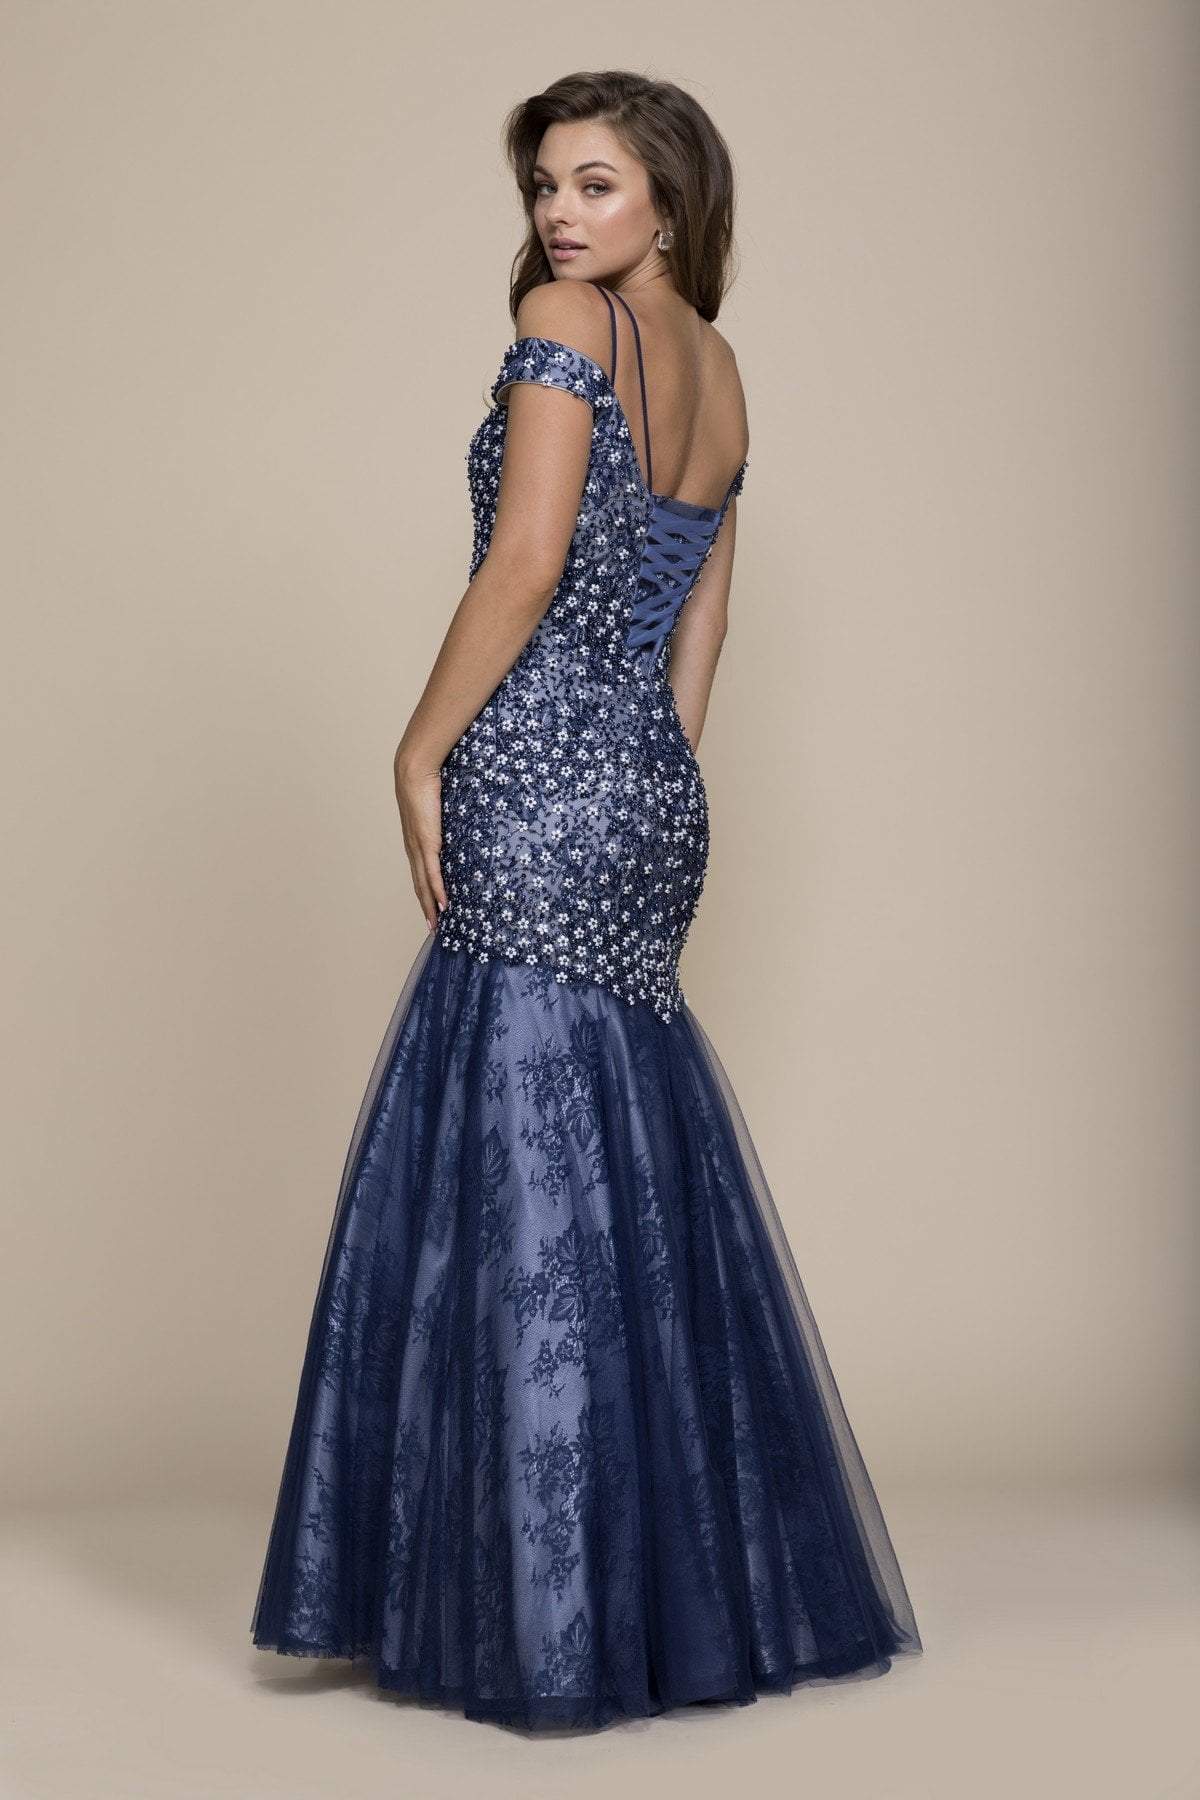 Nox Anabel - 8328 Beaded Off-Shoulder Trumpet Evening Gown Special Occasion Dress